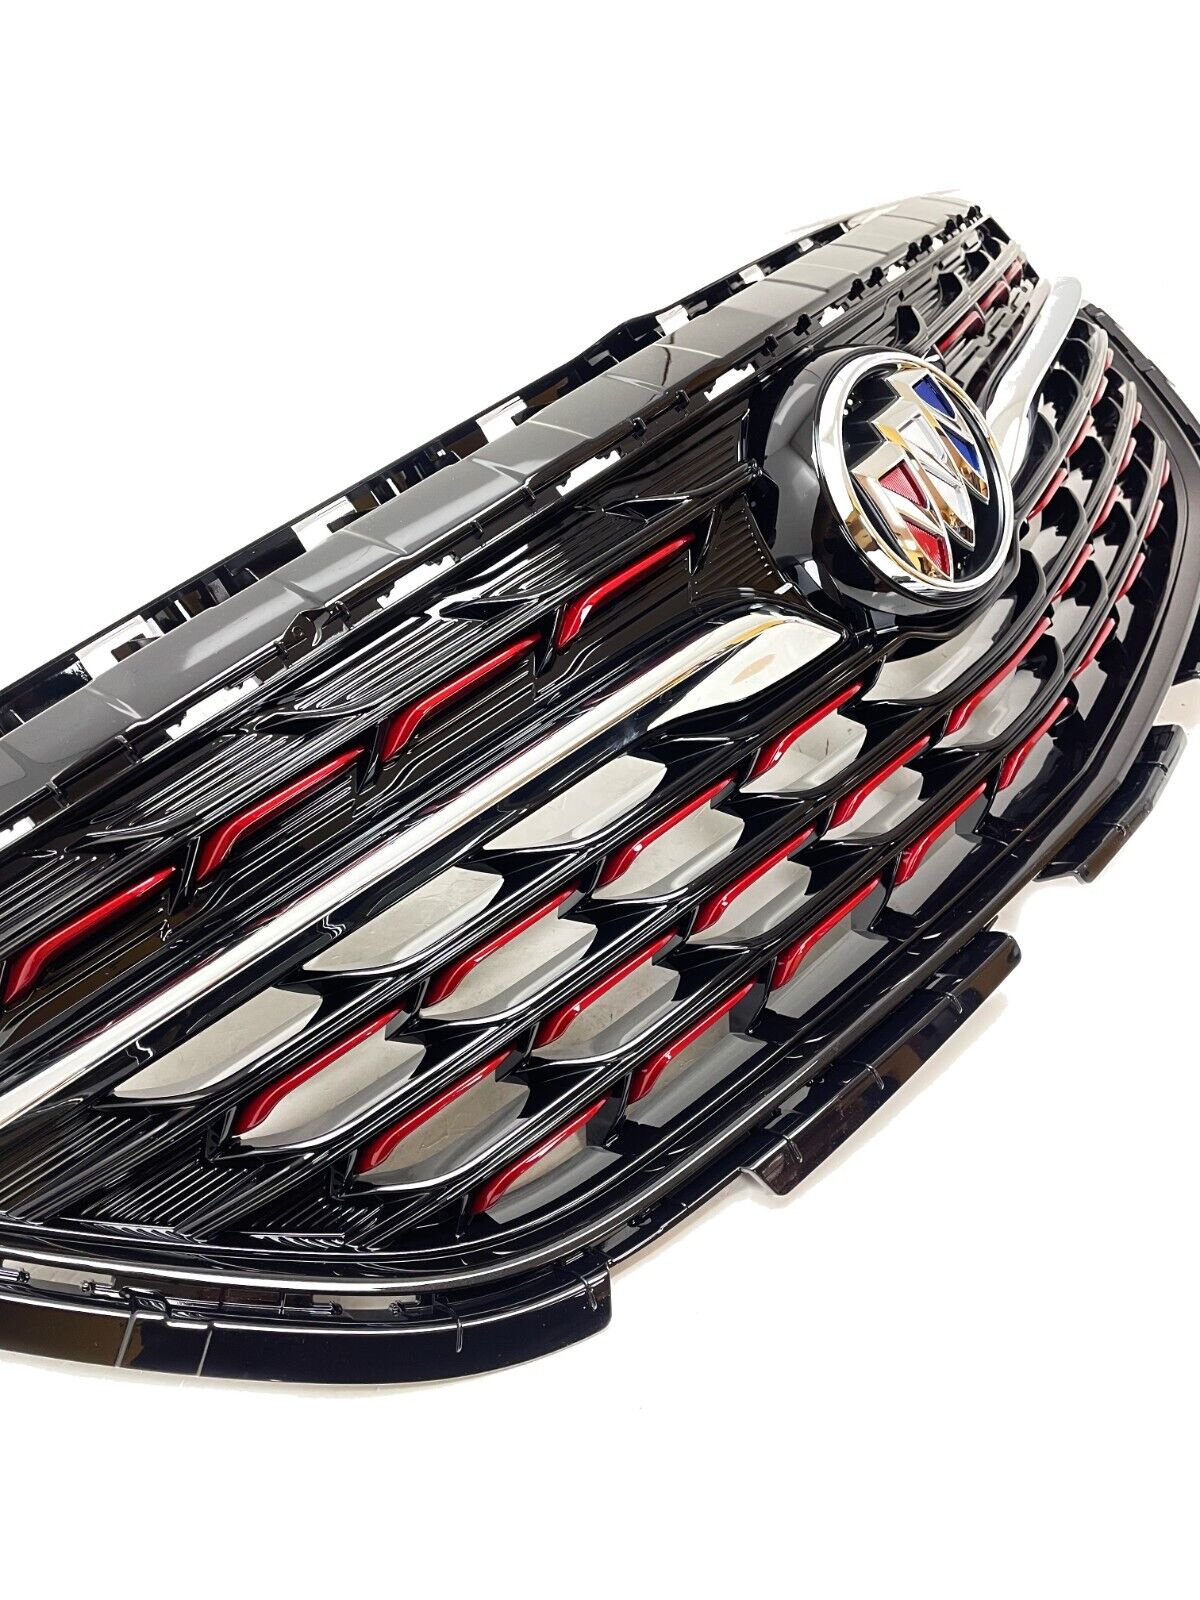 OEM 2020-2023 Buick Encore GX Grille With Twilight Surround Red Insert 42762674